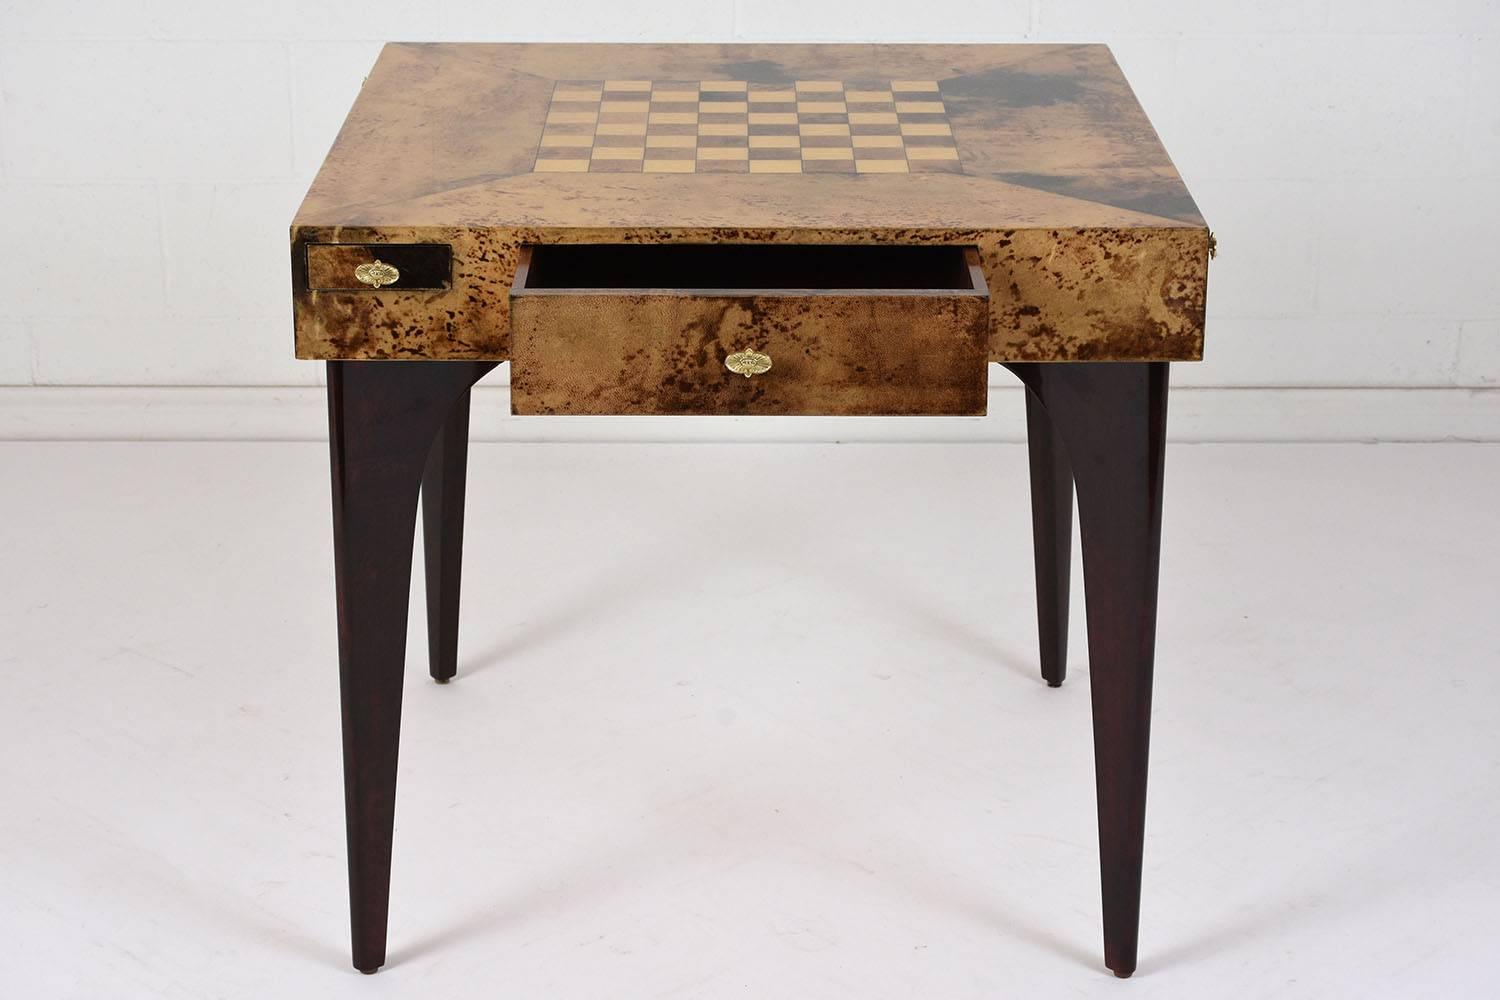 This 1980's modern-style game board is designed by Aldo Tura and is made of wood. The top of the table is covered in a unique goatskin parchment with an inlaid chess board in the center. There are two drawers on opposite sides of the table for